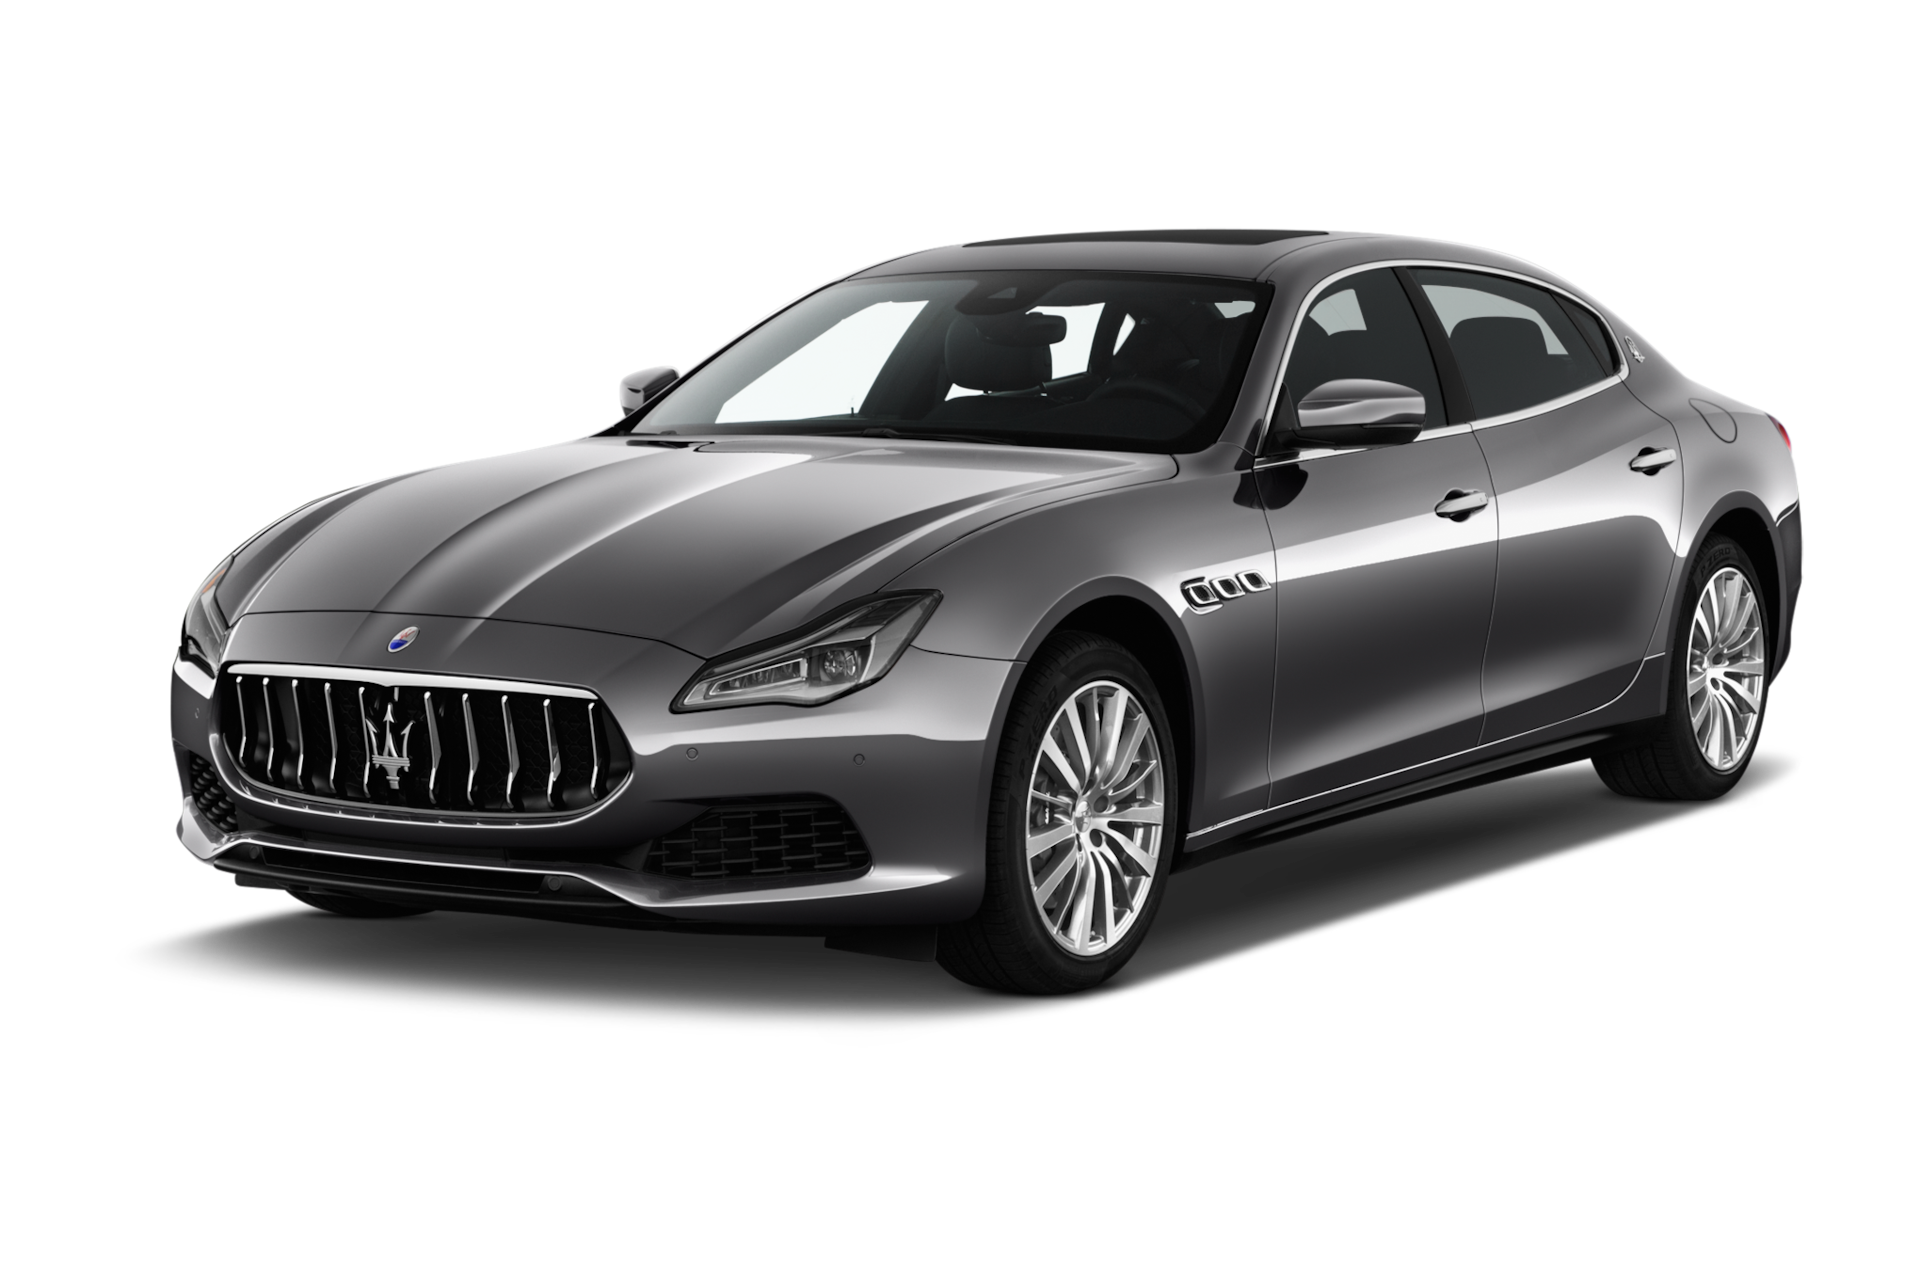 2020 Maserati Quattroporte Prices, Reviews, and Photos - MotorTrend